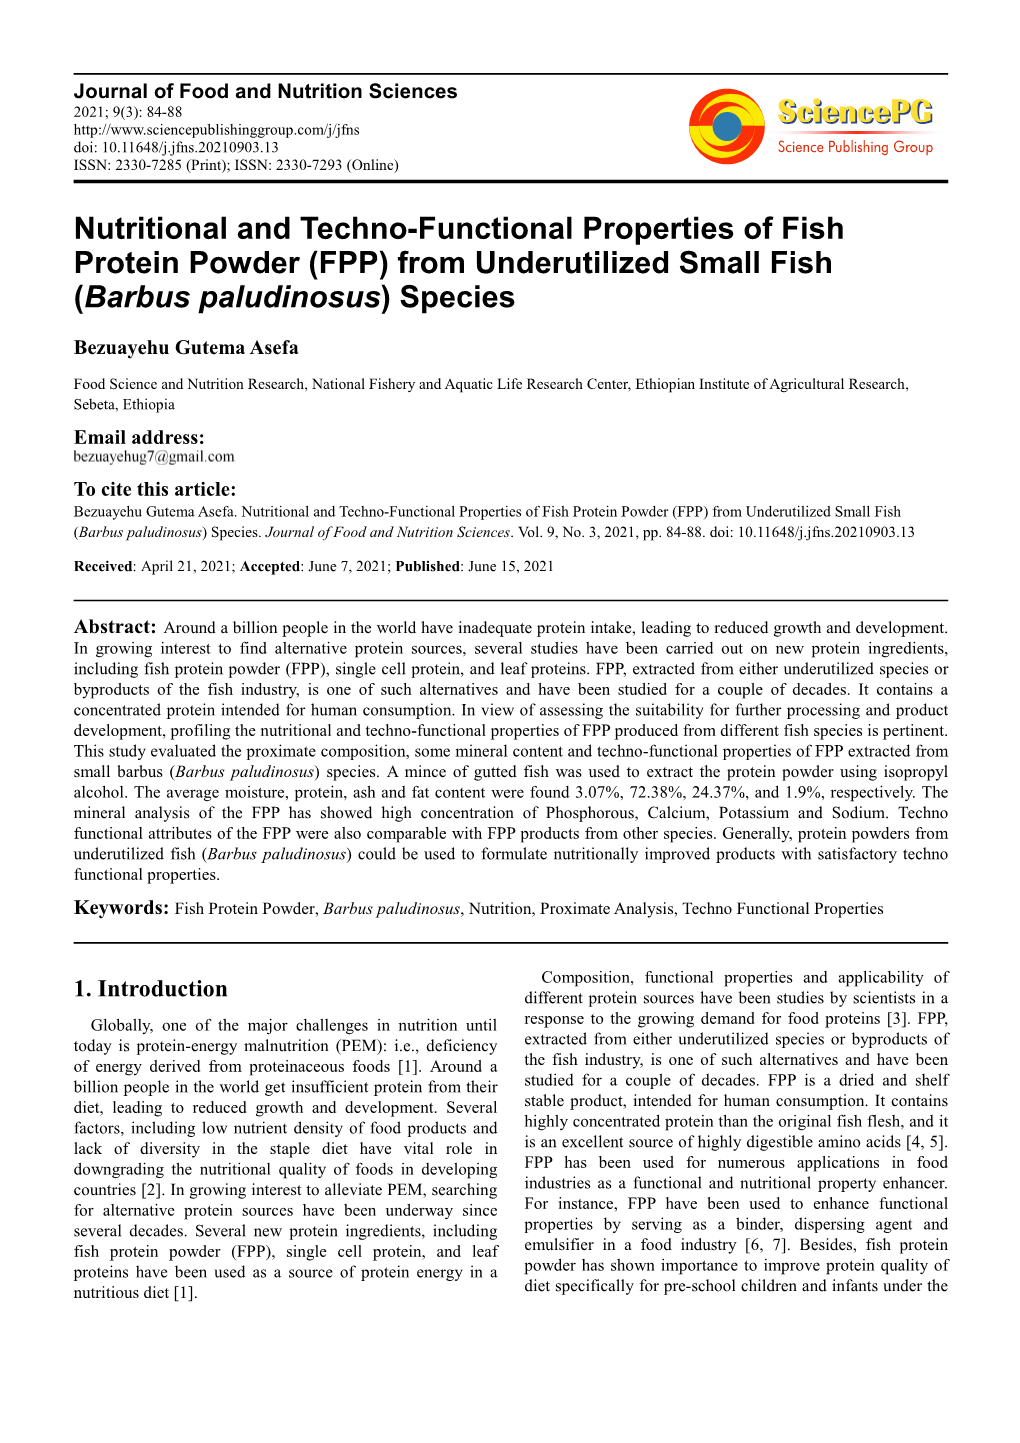 Nutritional and Techno-Functional Properties of Fish Protein Powder (FPP) from Underutilized Small Fish (Barbus Paludinosus ) Species